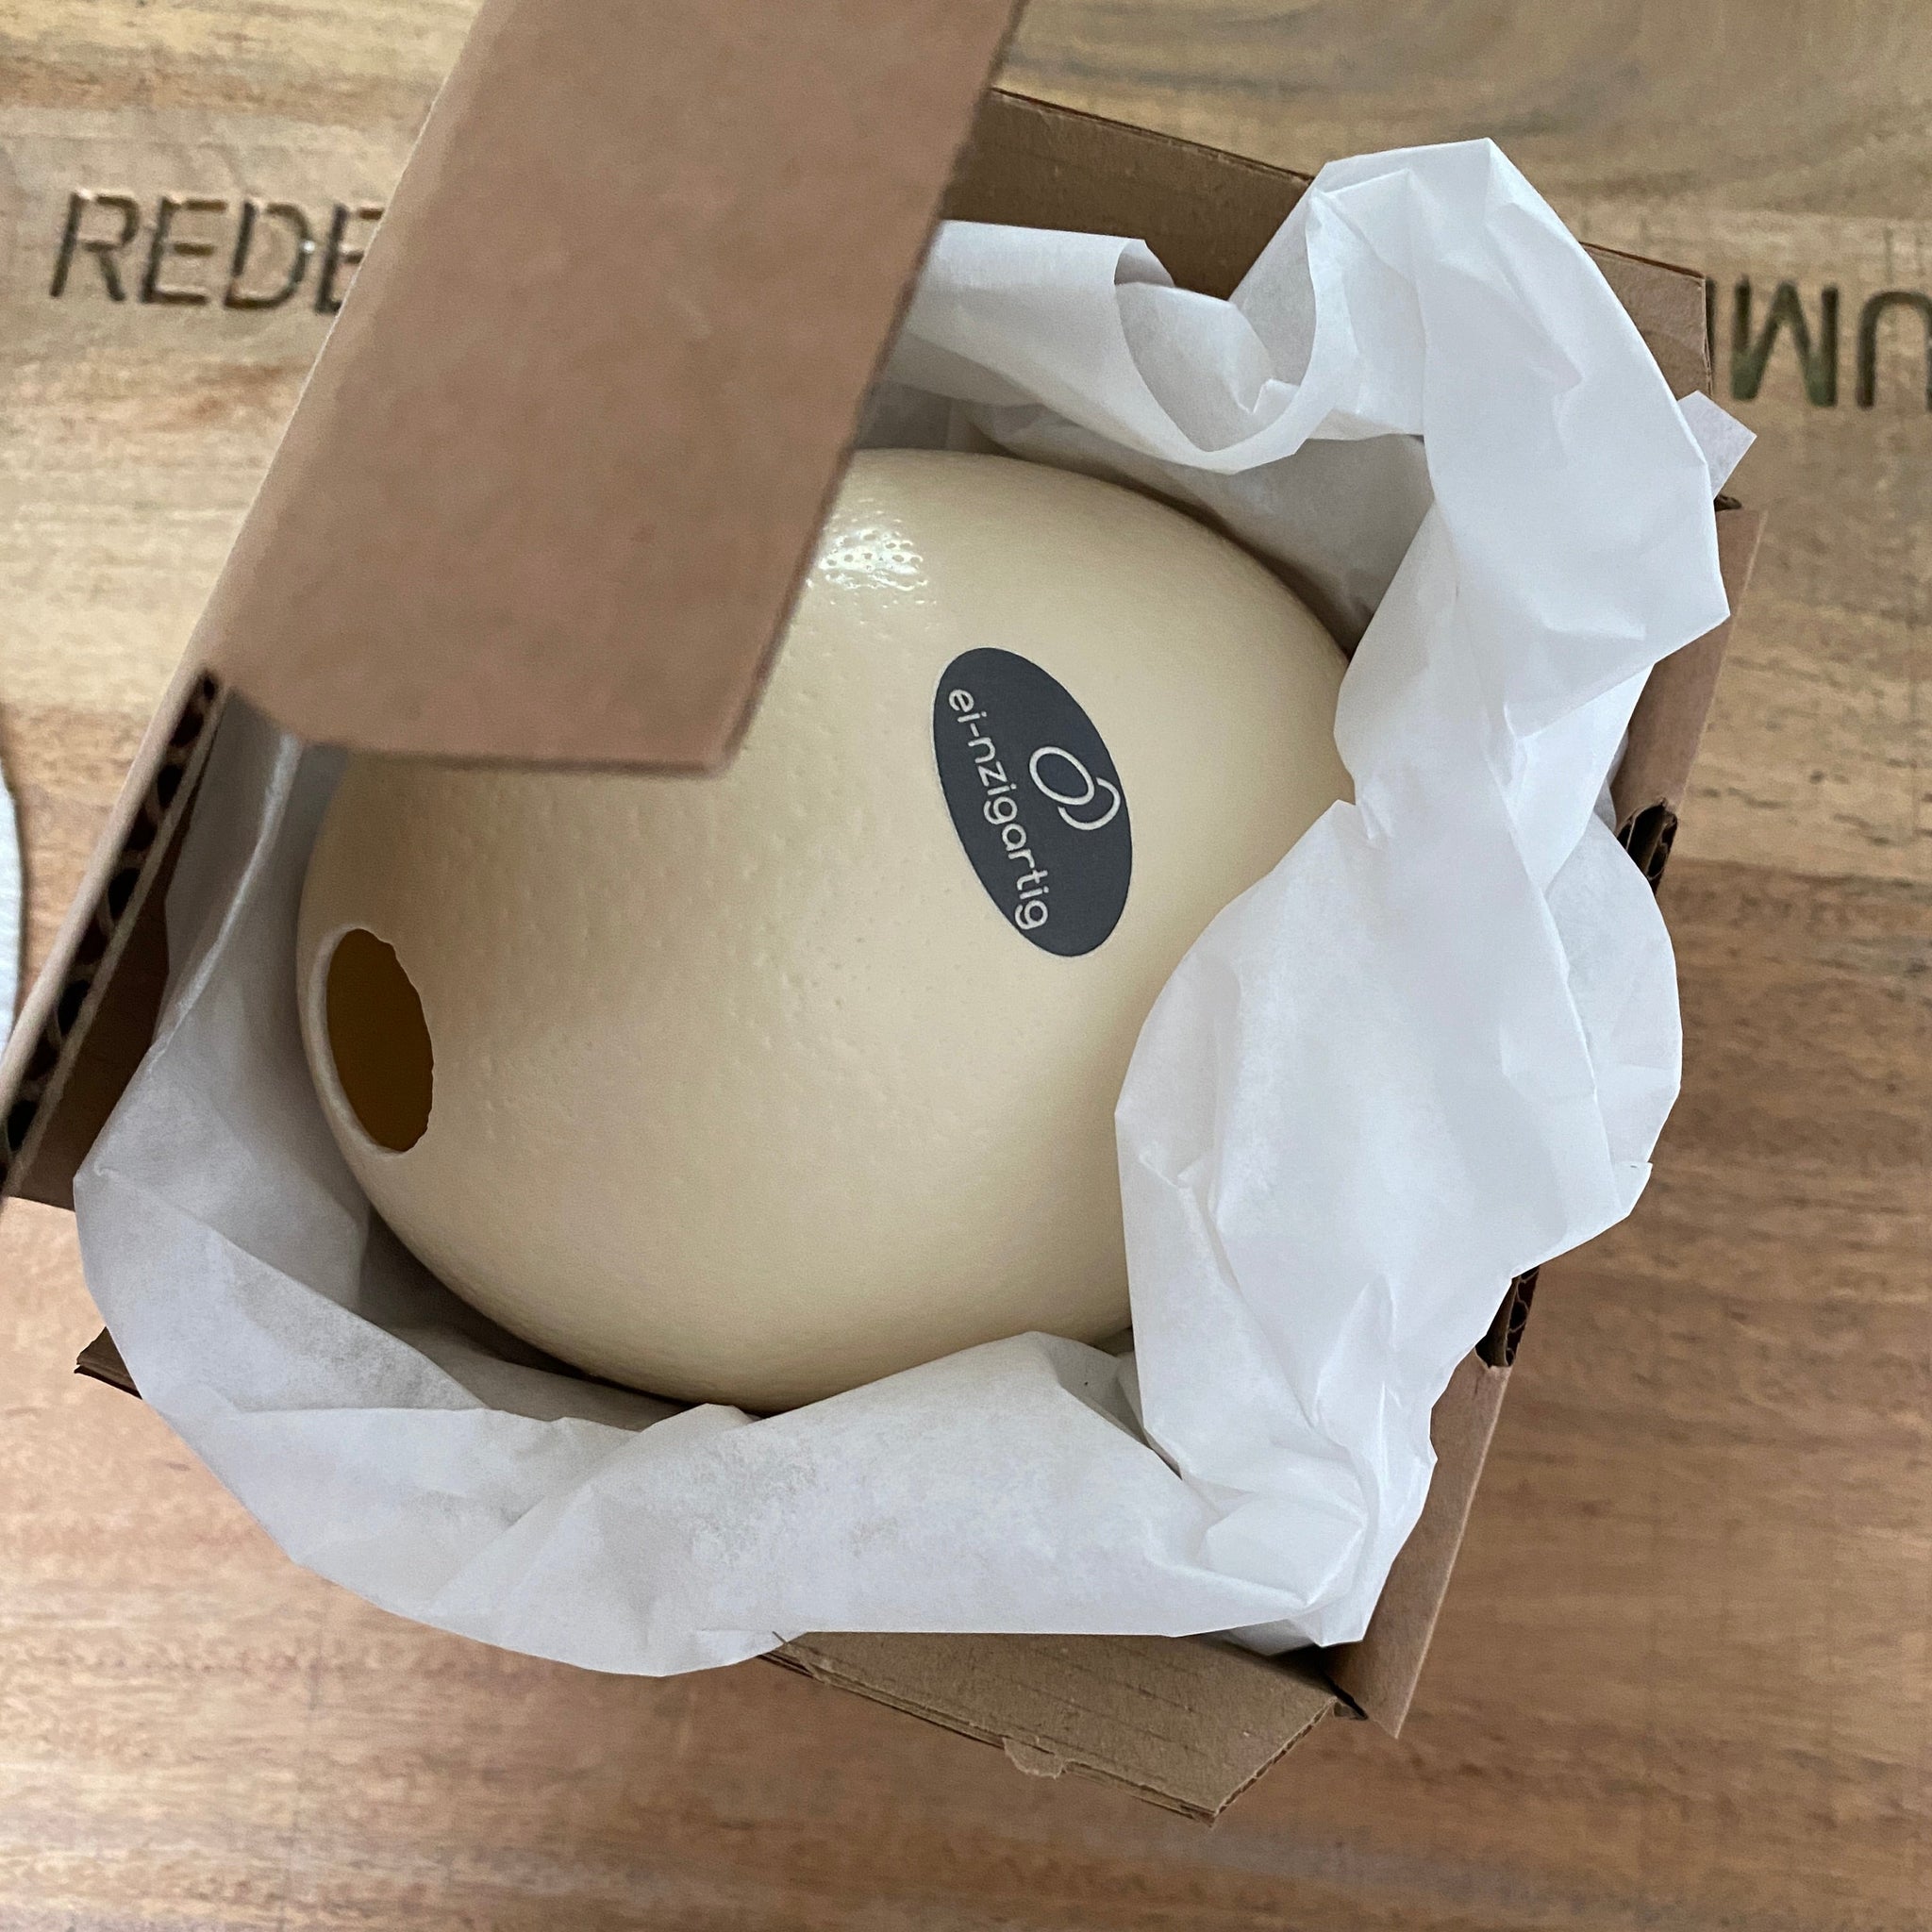 Ostrich egg “Kuh-le Kuh”